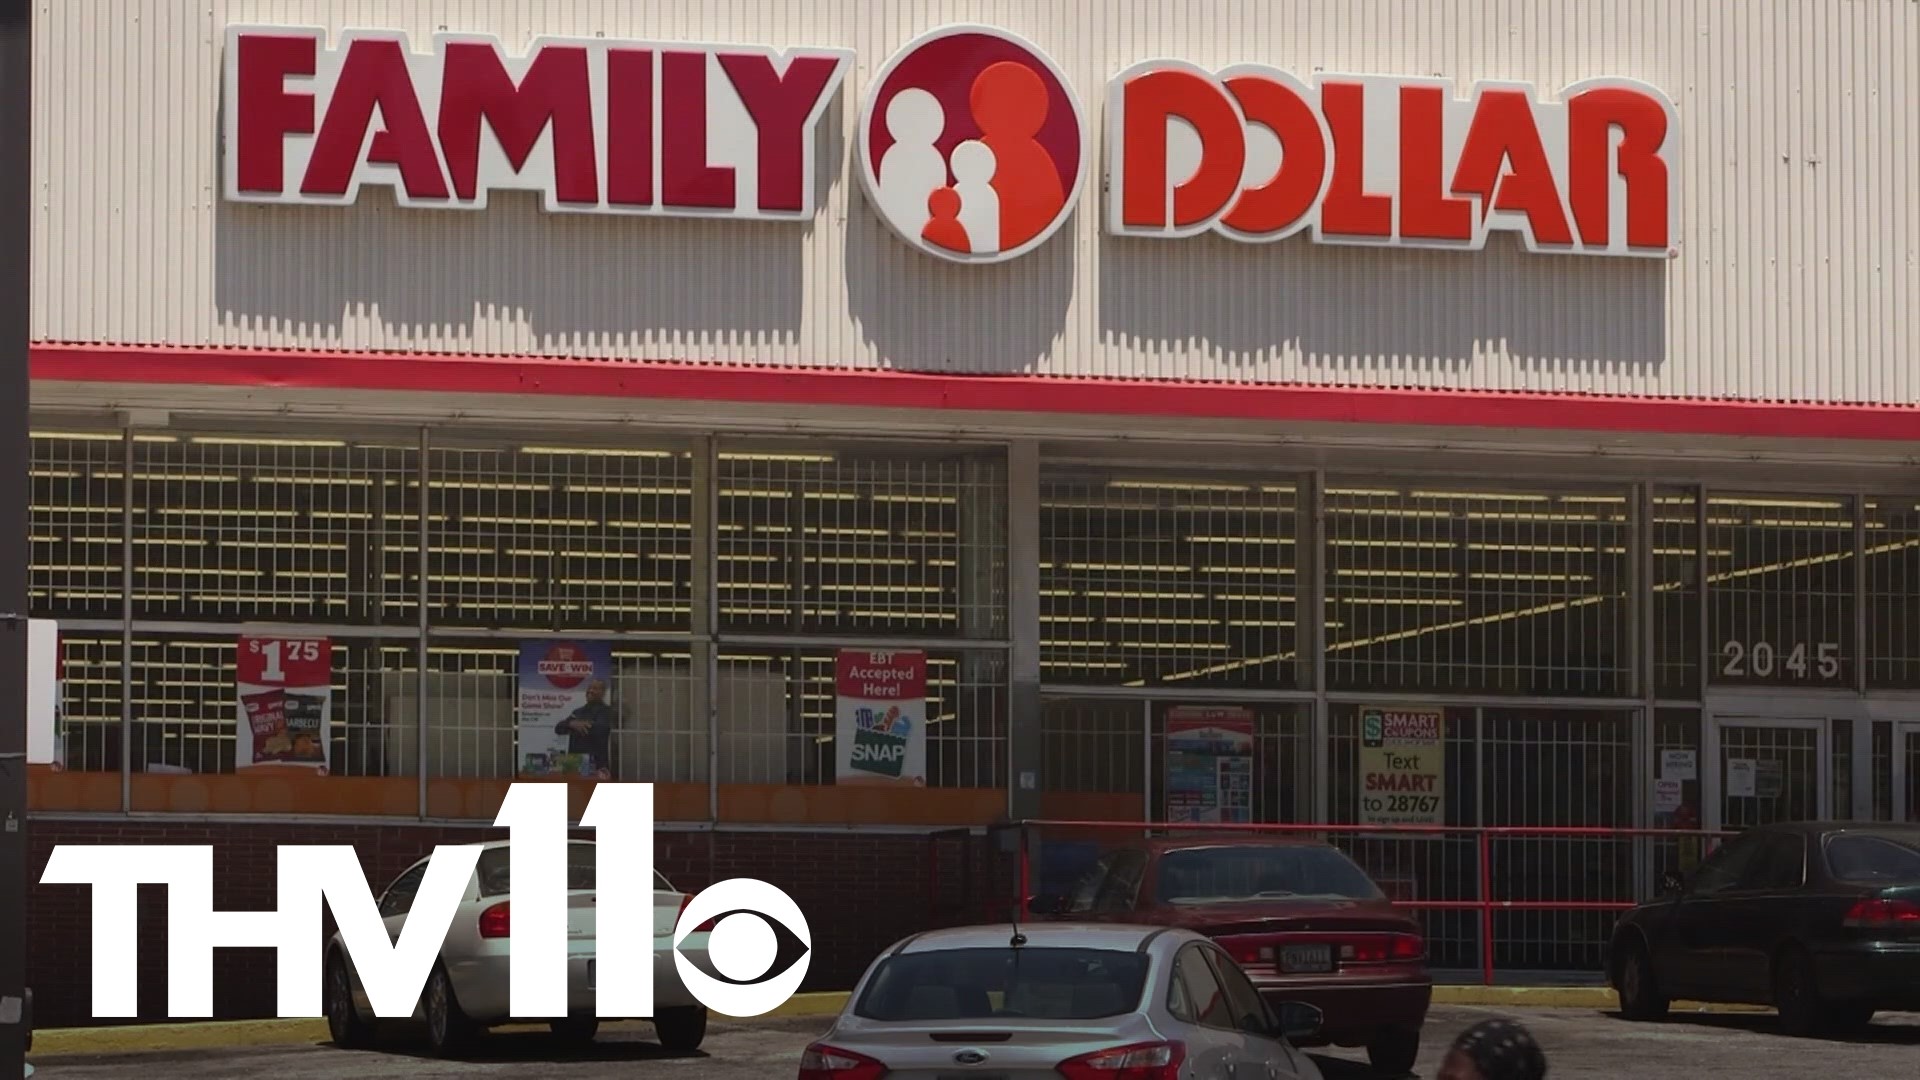 Family Dollar has announced that they will be closing about 600 stores across the country. Now some are wondering what impact that will have here in Arkansas.